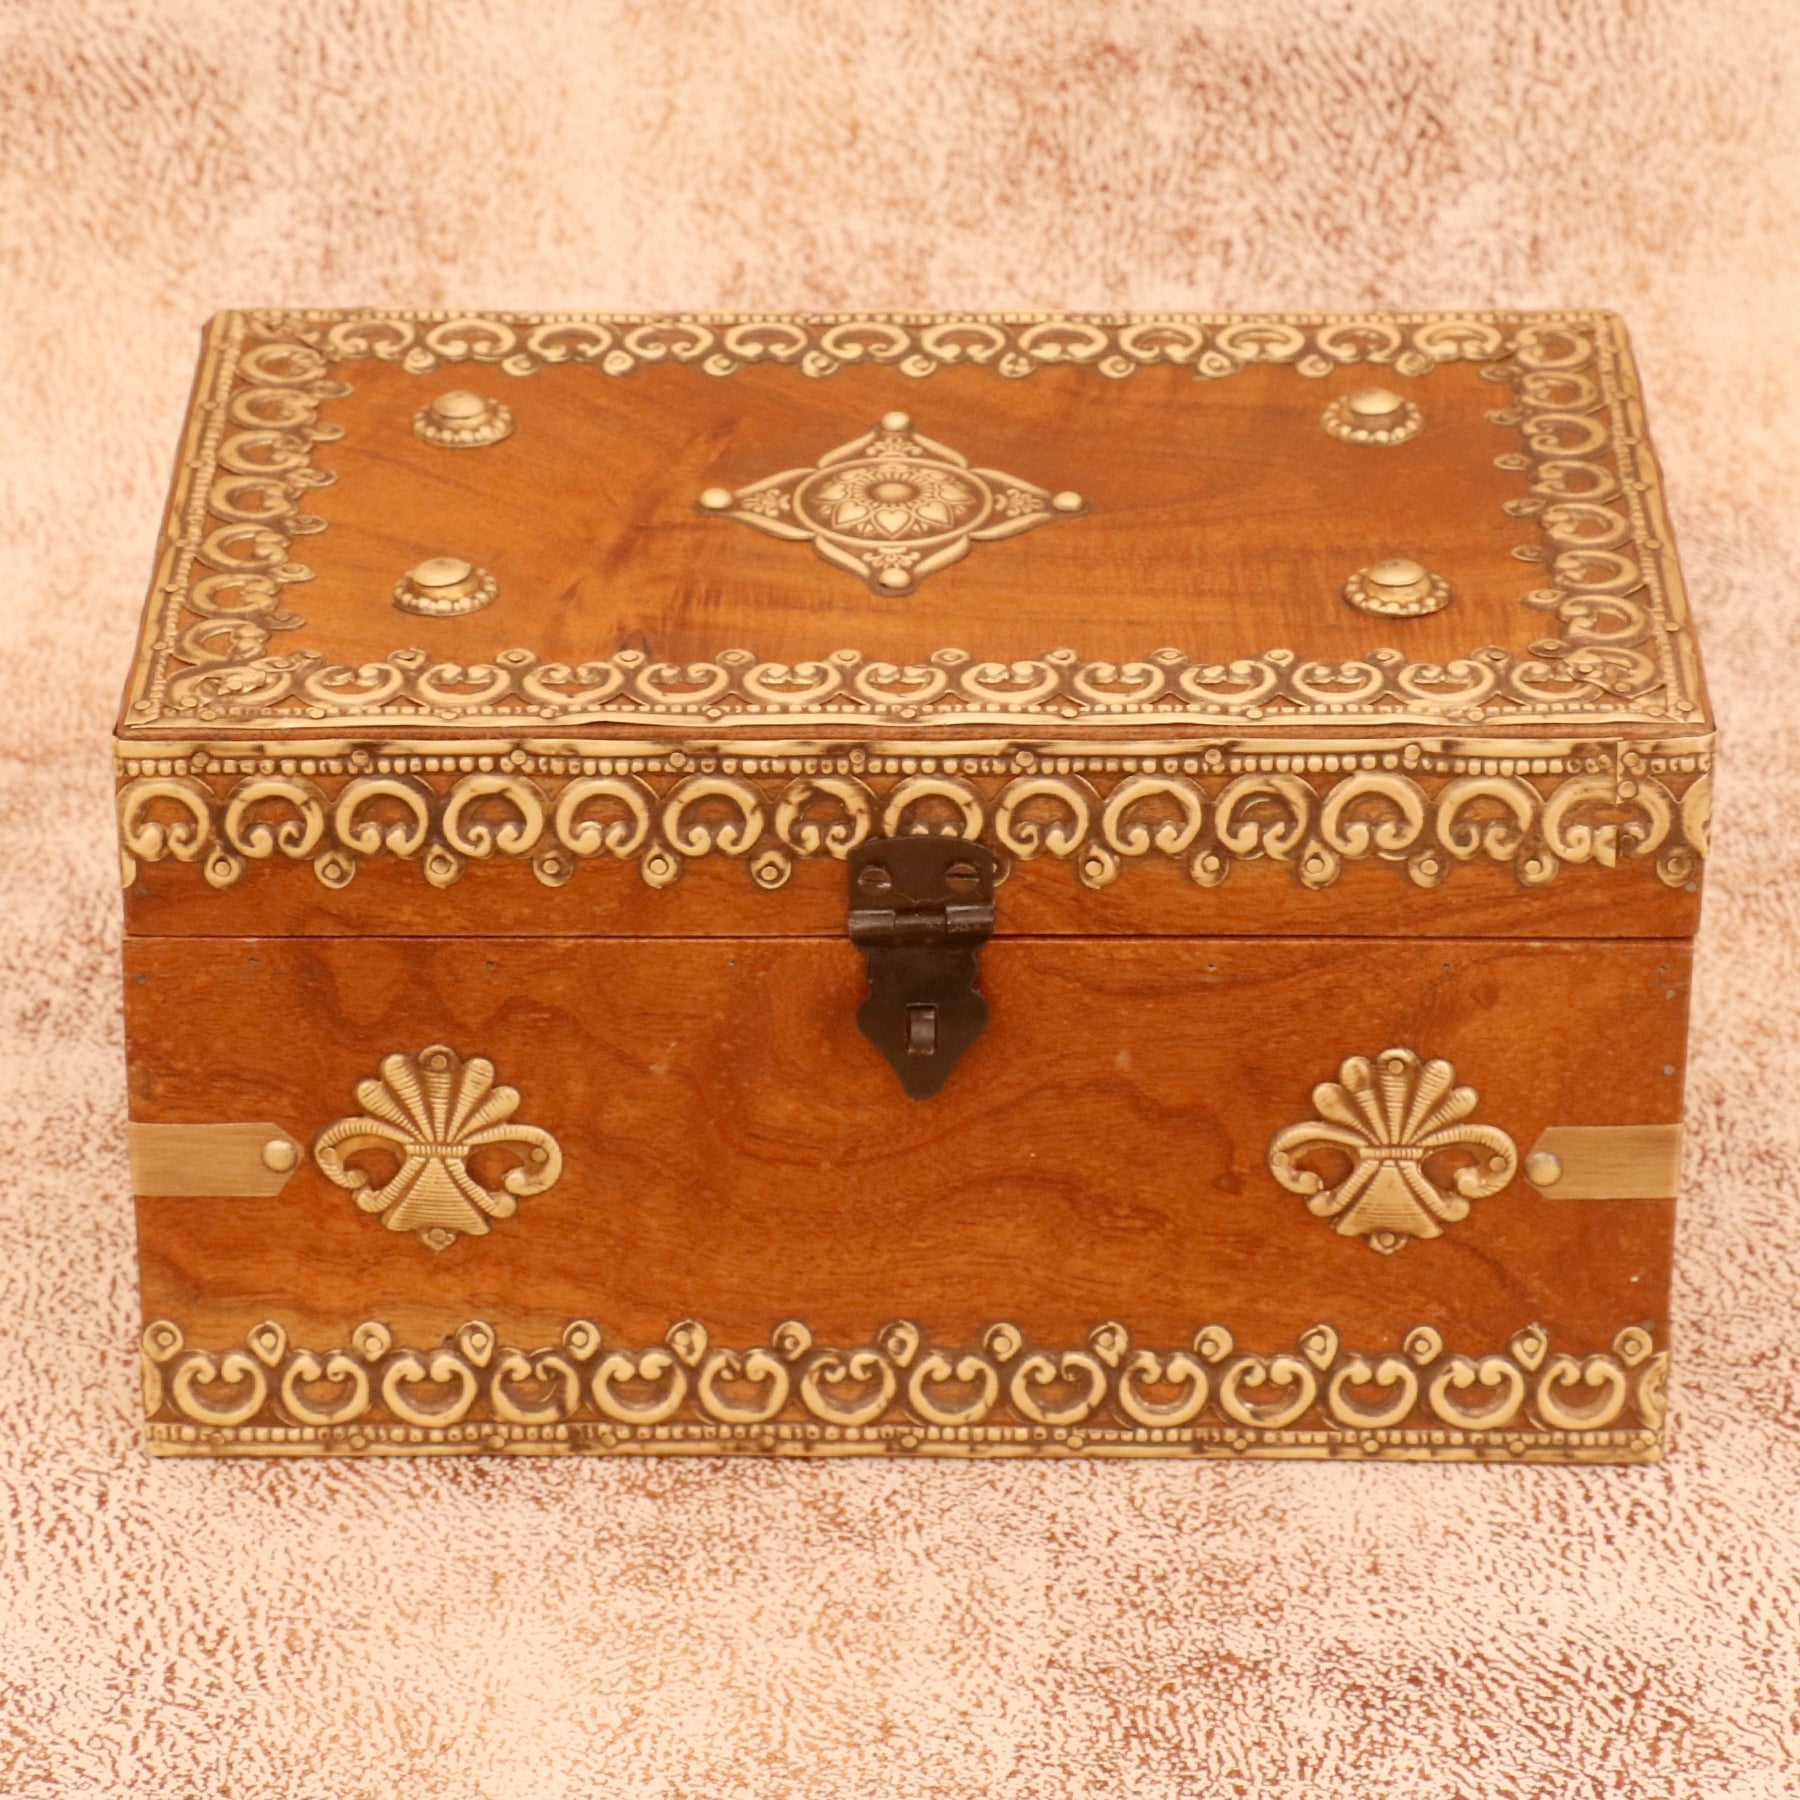 Wooden Rustic Boxes Large (12 x 8 x 7 Inch) Wooden Box